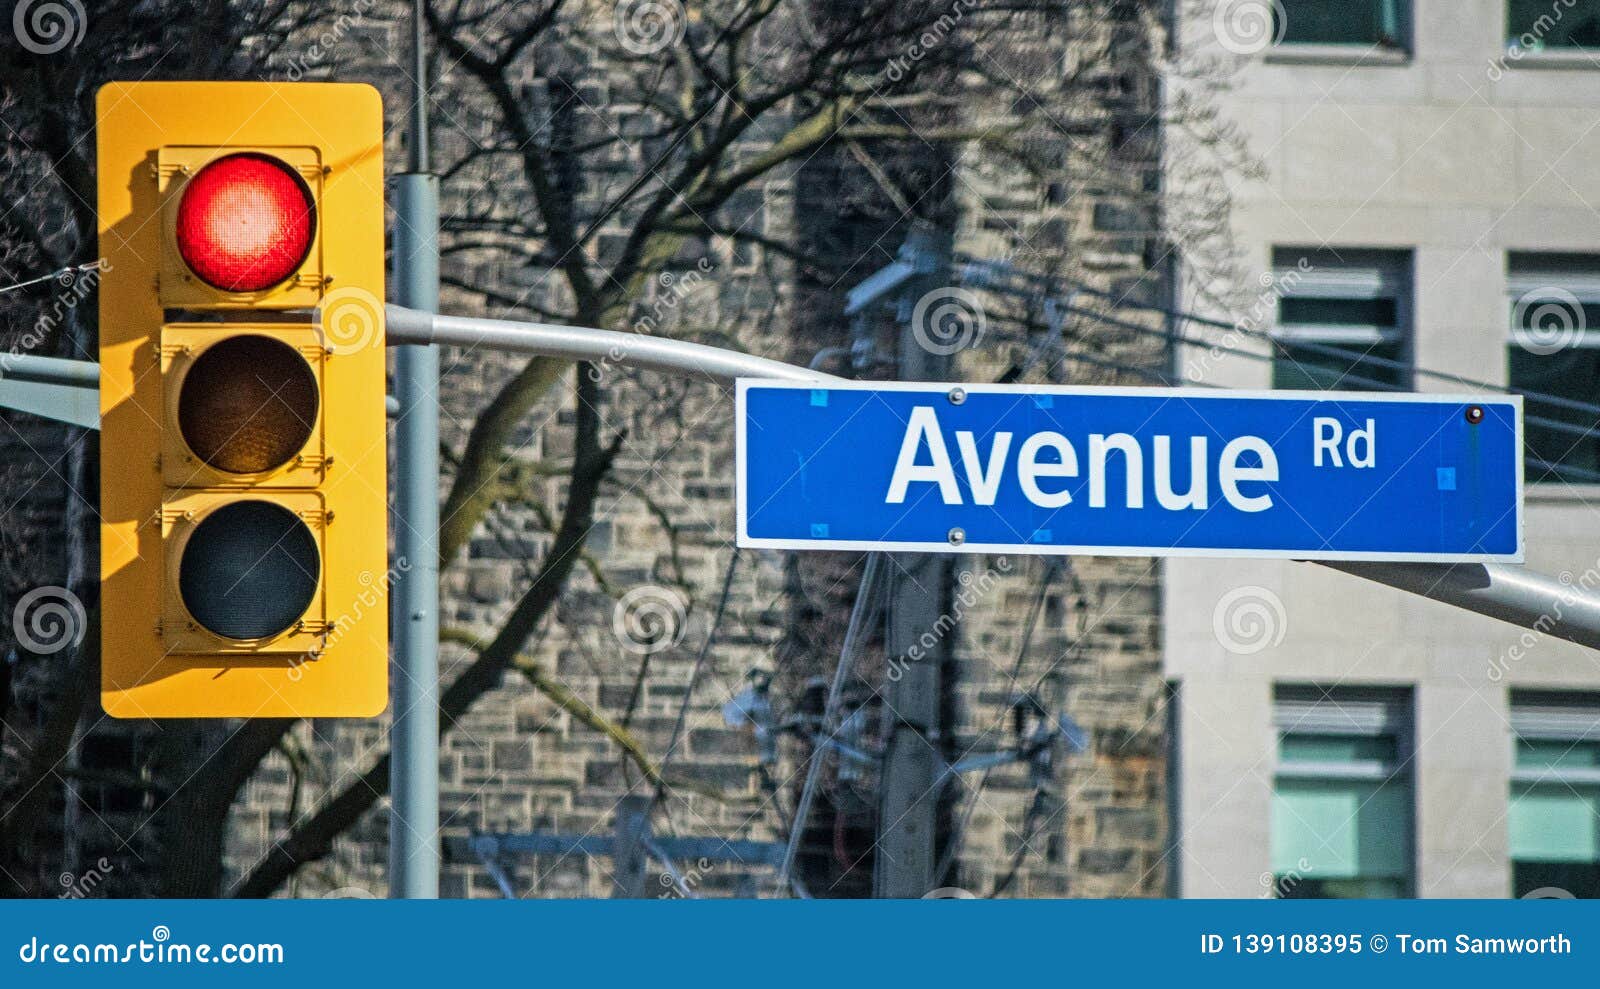 avenue-road-street-sign-red-light-traffic-along-st-clair-ave-west-toronto-ontario-canada-139108395.jpg